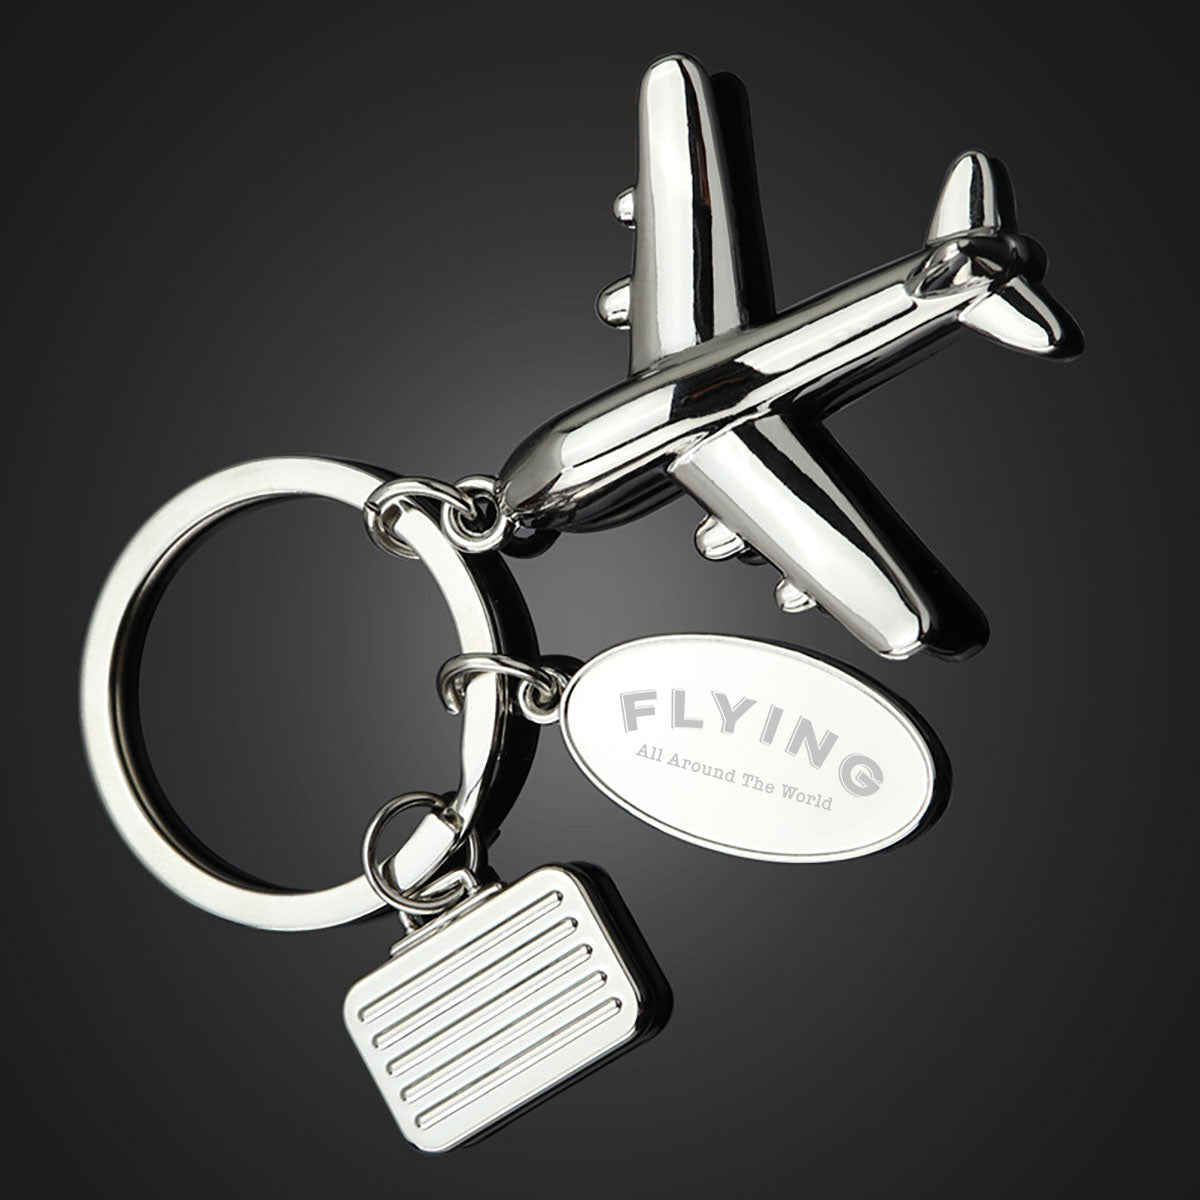 Flying All Around The World Designed Suitcase Airplane Key Chains